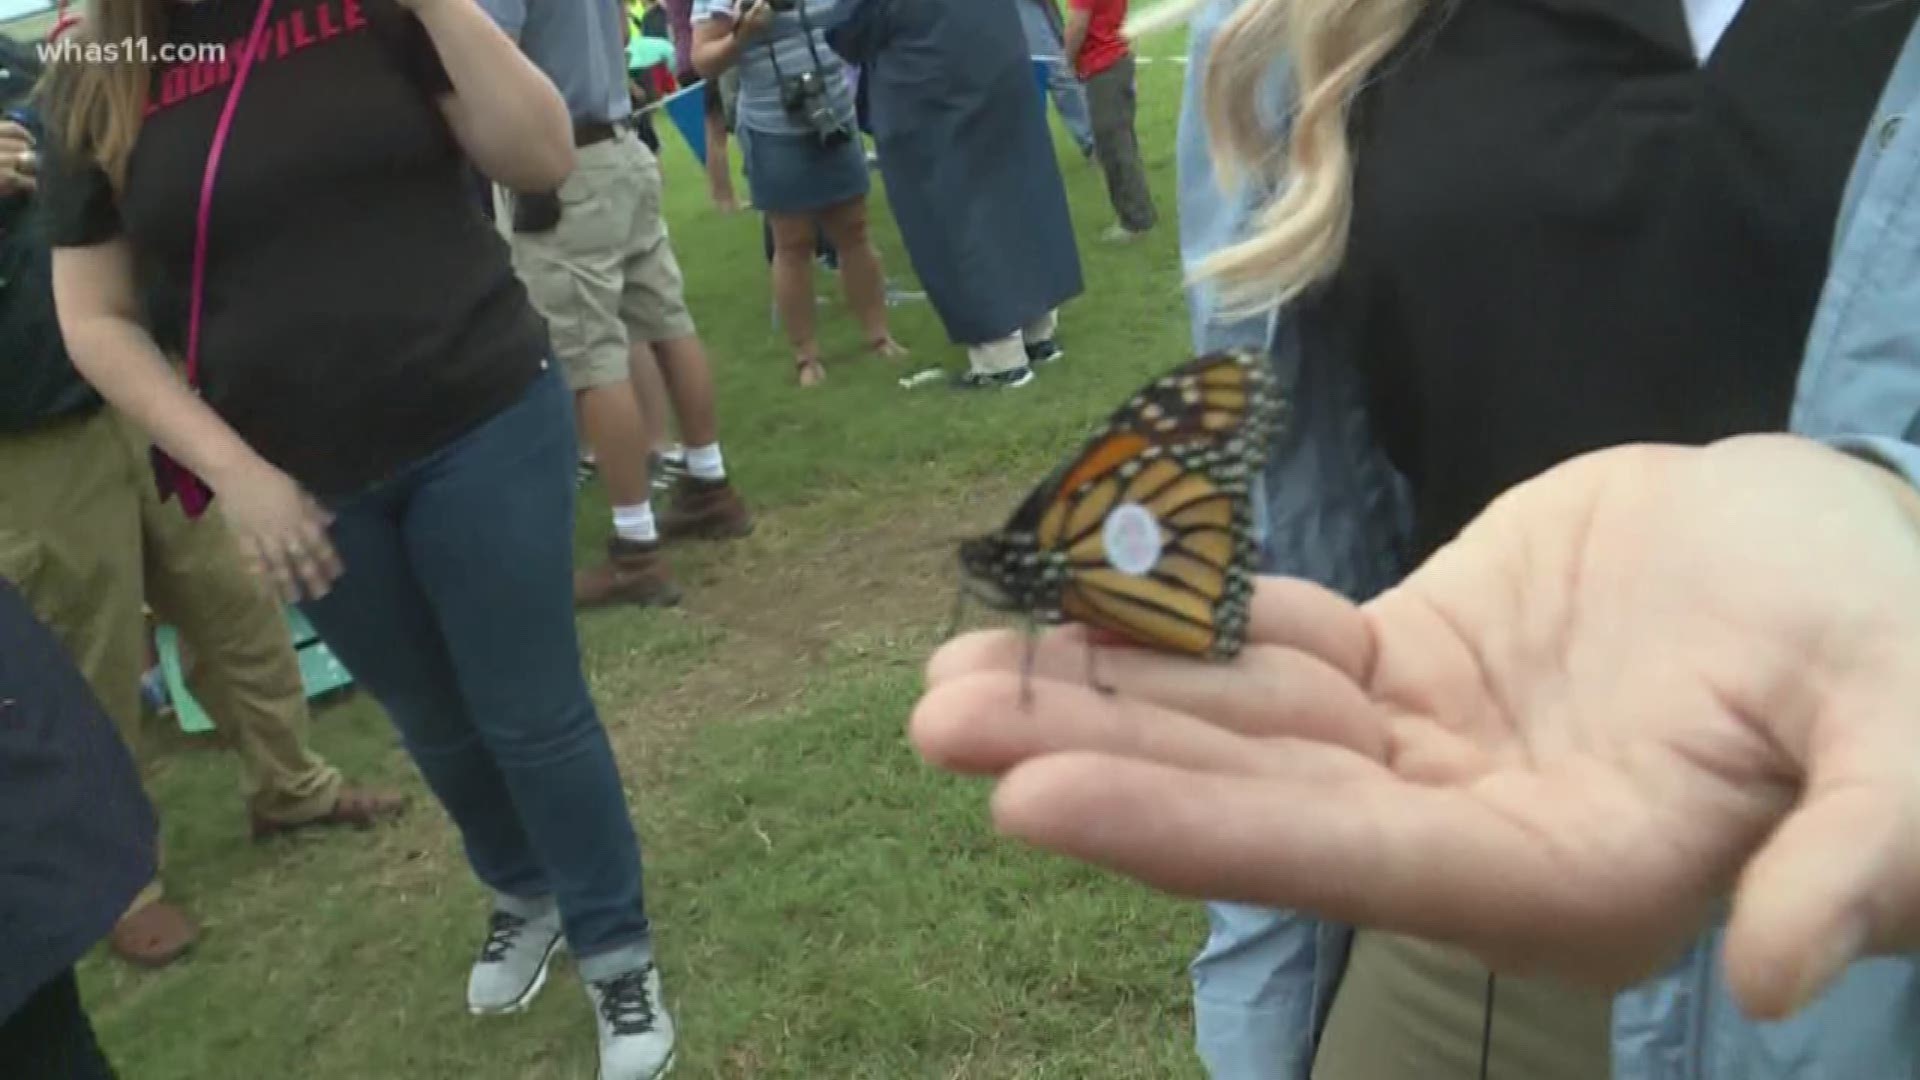 The Butterflies N' Bloom exhibit has drawn thousands of visitors to the Louisville Zoo over the summer and today that exhibit culminated with the tagging and release of over 1,000 butterflies.